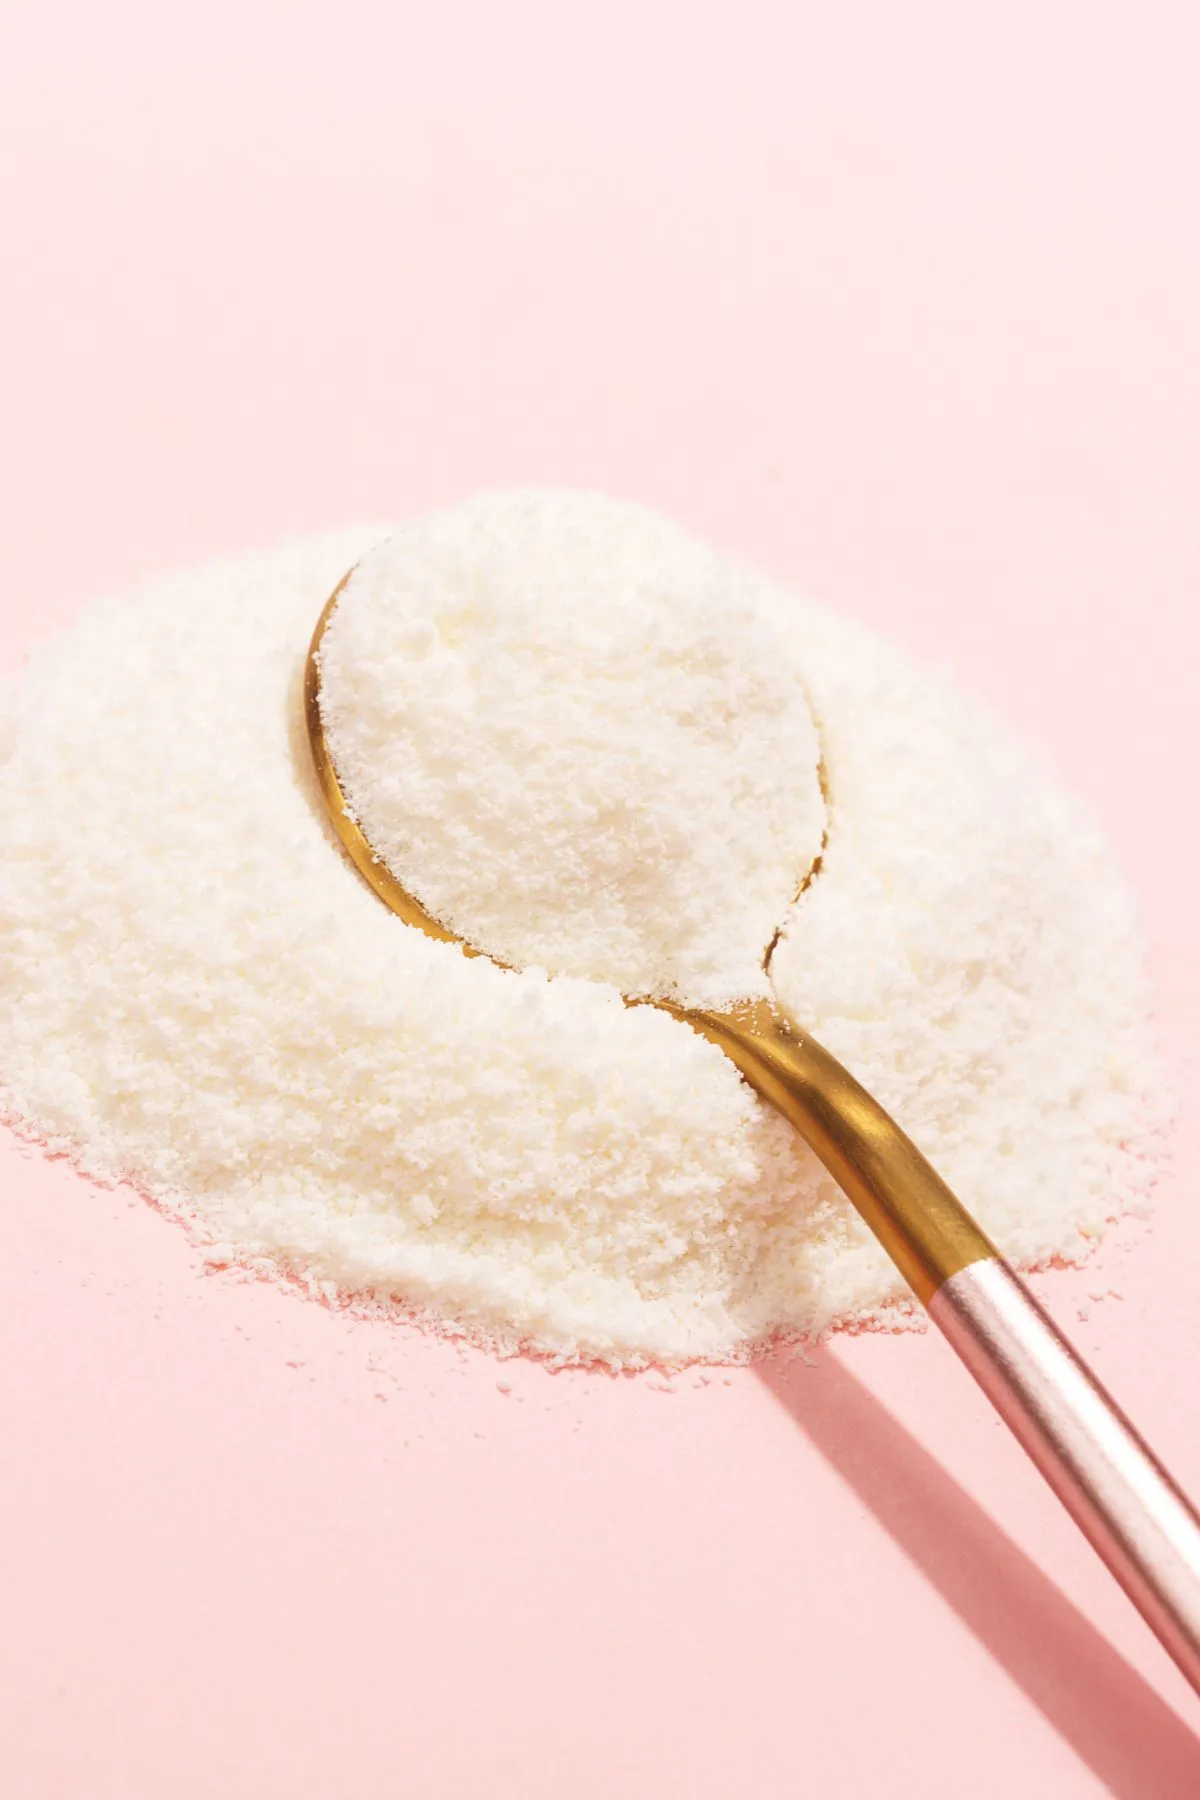 Pile of white magnesium powder with a gold spoon on a pink background.